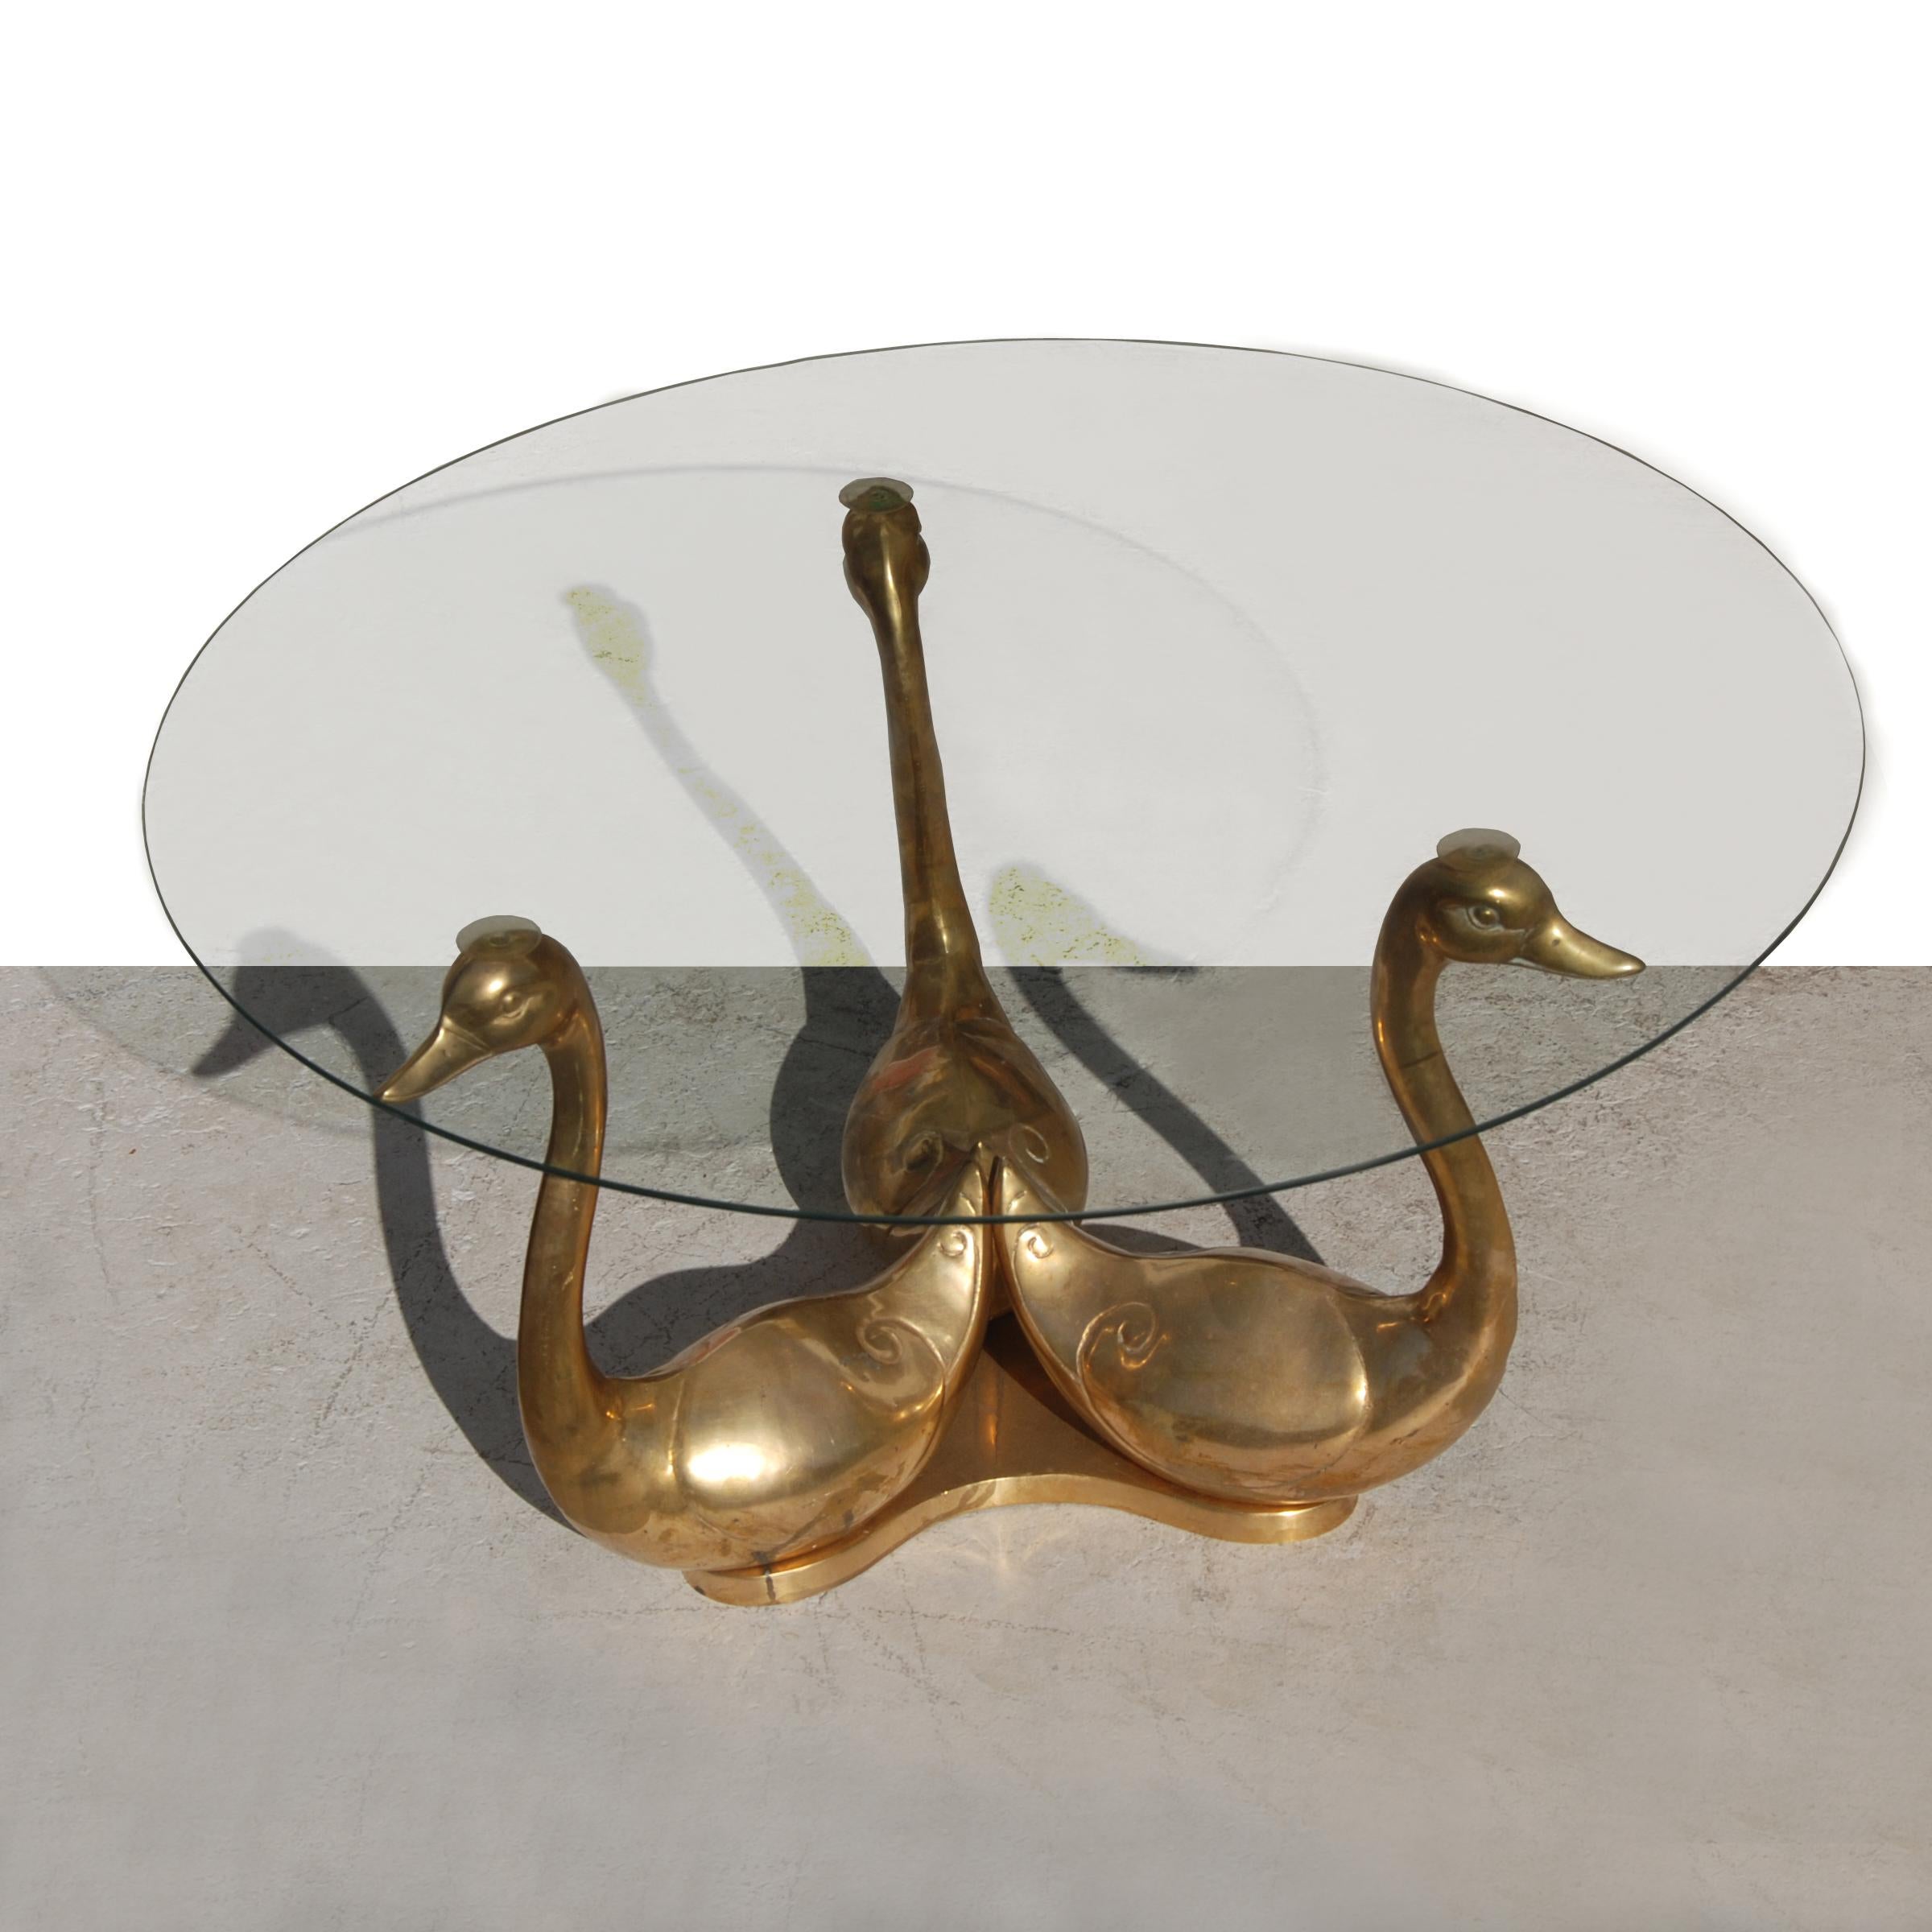 Maison Jansen style bronze swan cocktail table

Three-seated brass swans support a glass top. A rich patina gives an antique feel to the piece.
Measures: 32